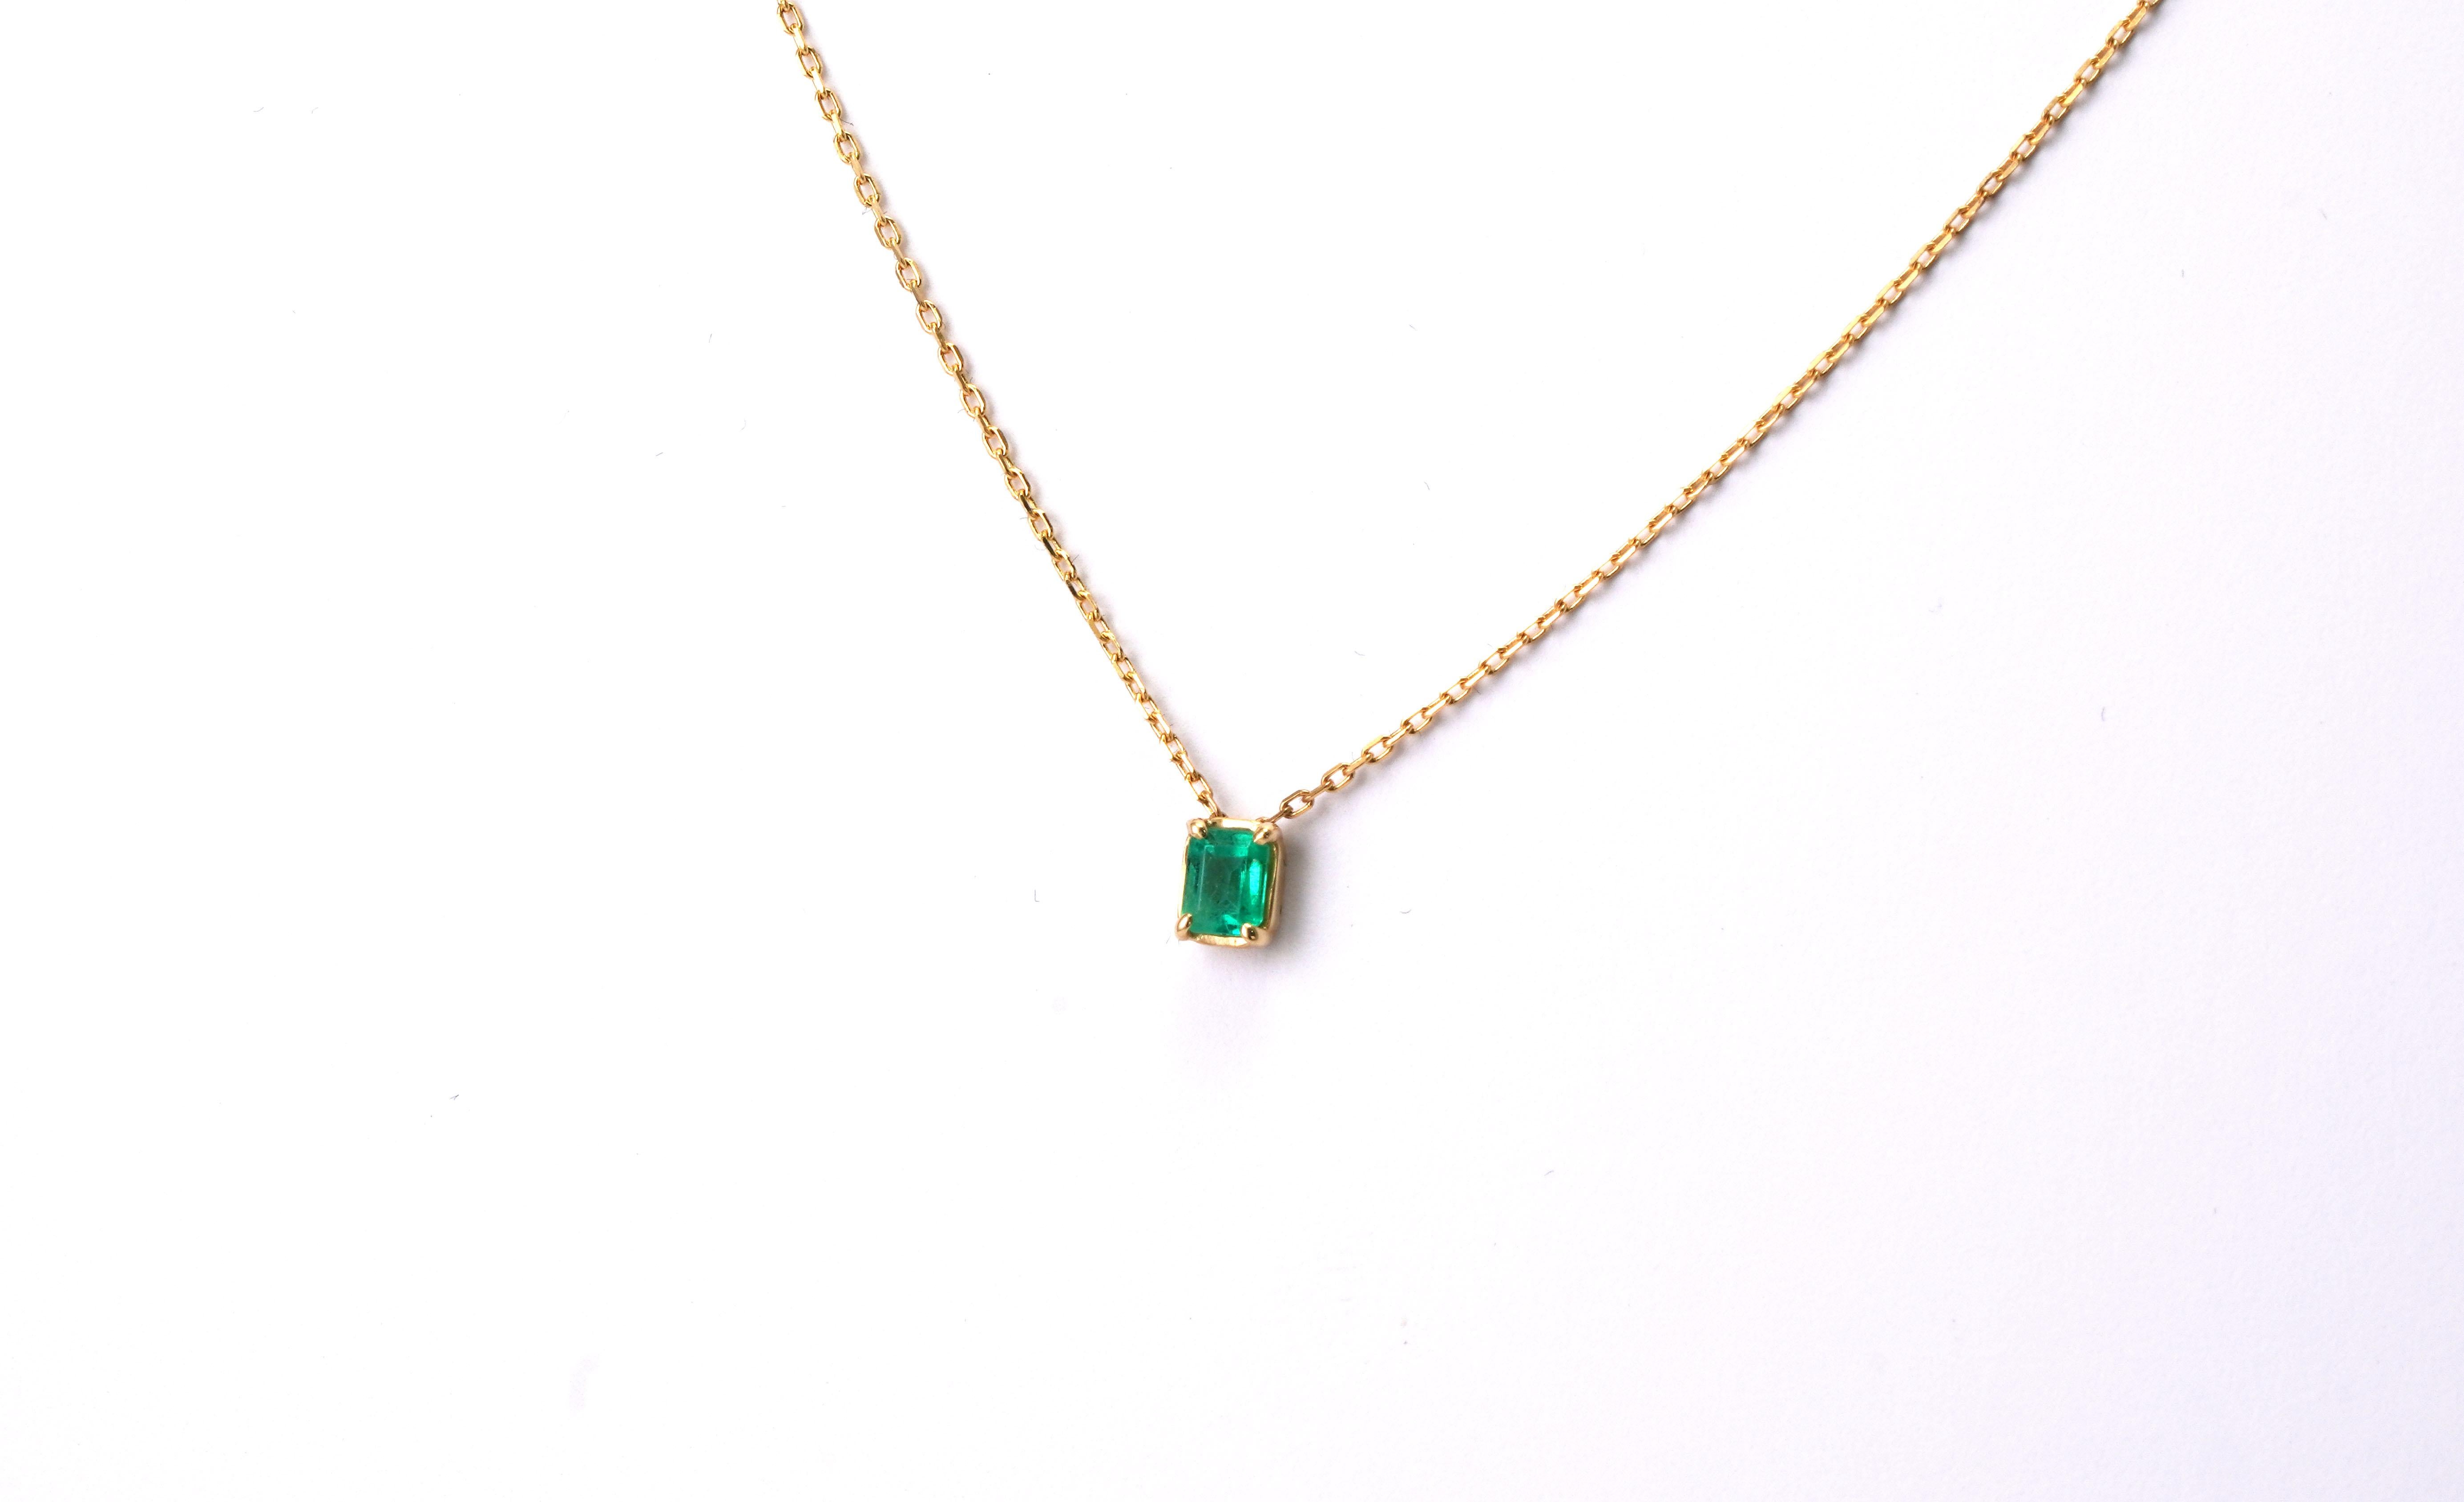 14 kt Gold Necklace with Columbian Emerald
Gold color: Yellow
Dimensions: 40 cm Length
Total weight: 0.96 grams

Set with:
- Emerald
Cut: Emerald
Weight: 0.21 carat
Color: Green